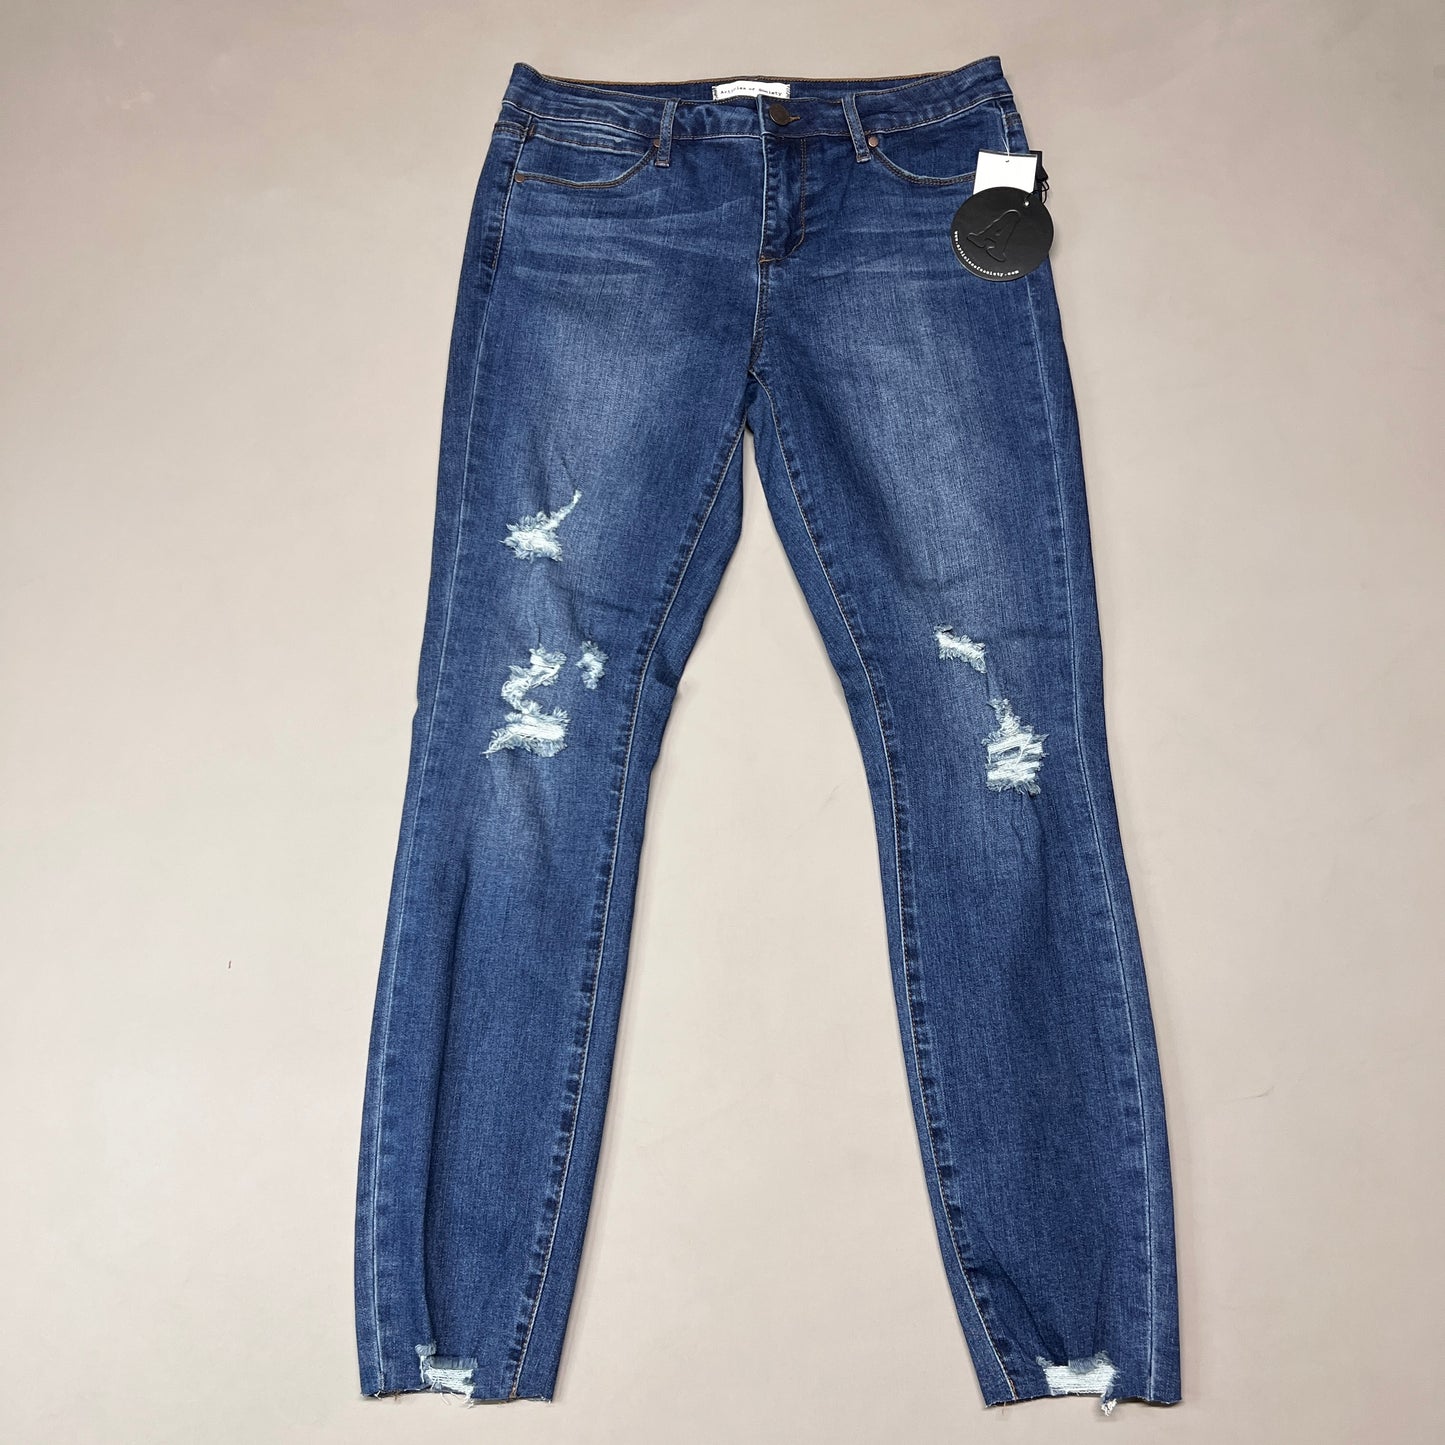 ARTICLES OF SOCIETY Hilo Ripped Denim Jeans Women's Sz 29 Blue 5350PLV-706 (New)